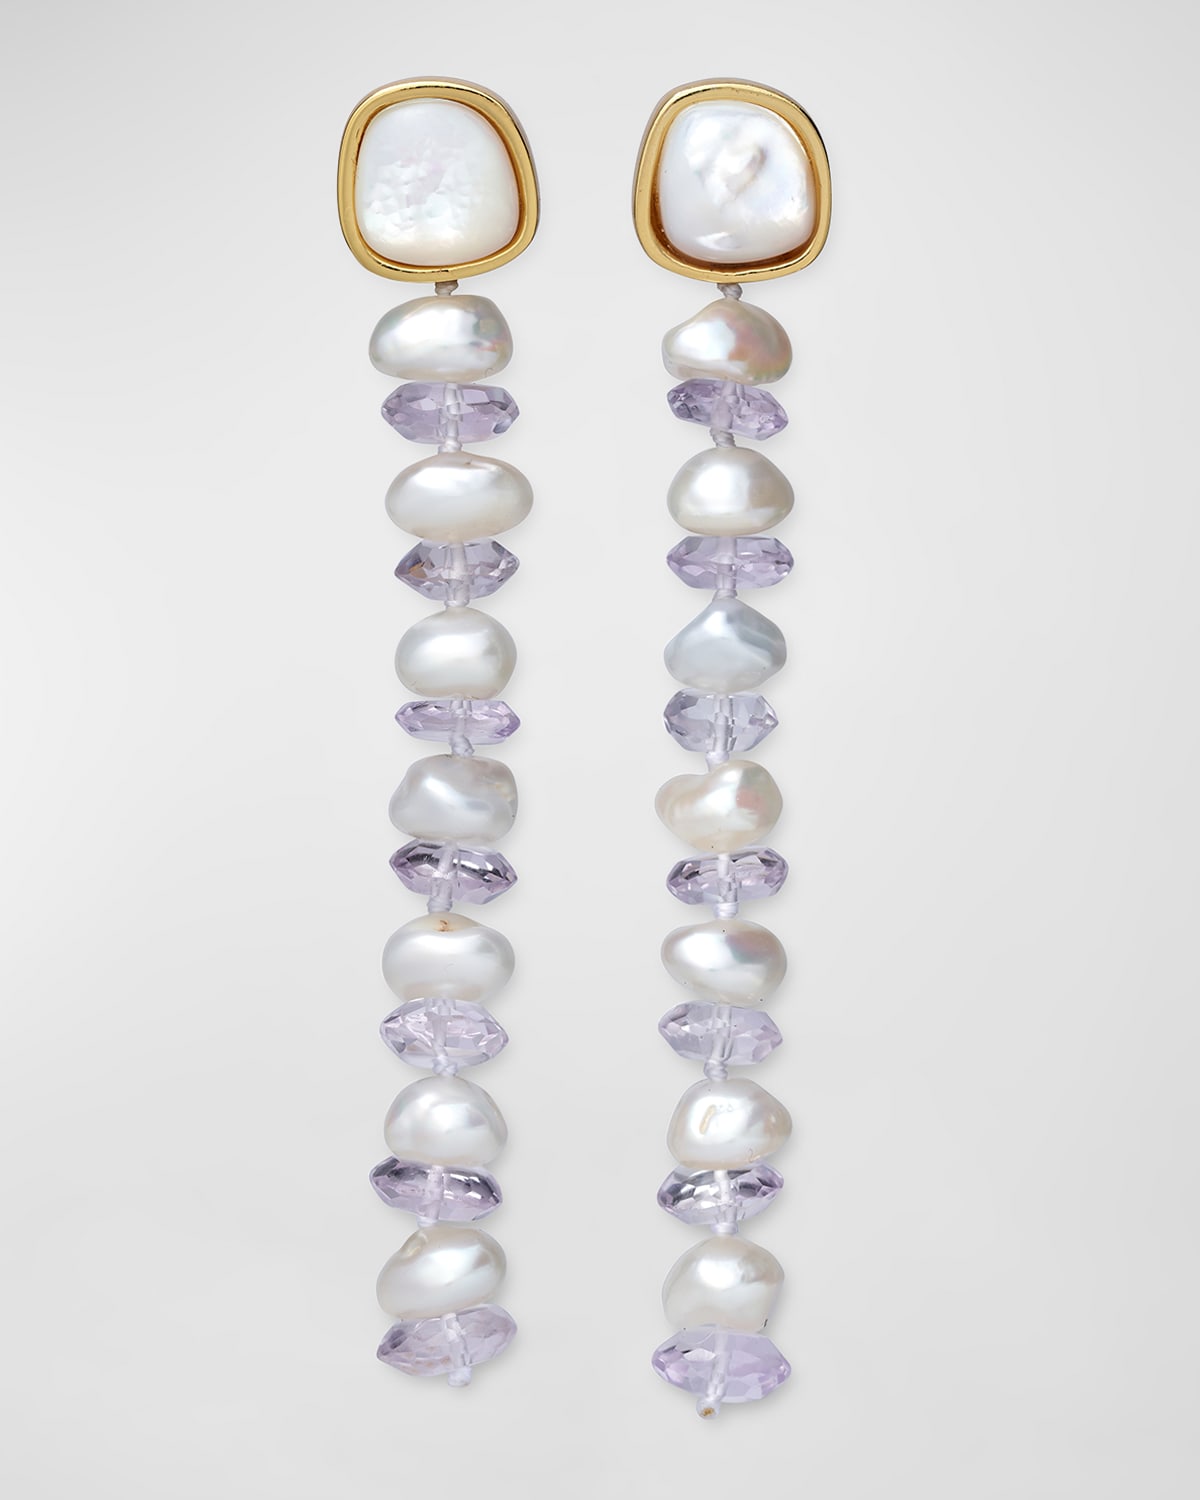 Lizzie Fortunato Wisteria 24K Yellow Gold Column Drop Earrings with Freshwater Pearl, Amethyst, and Mother-of-Pearl